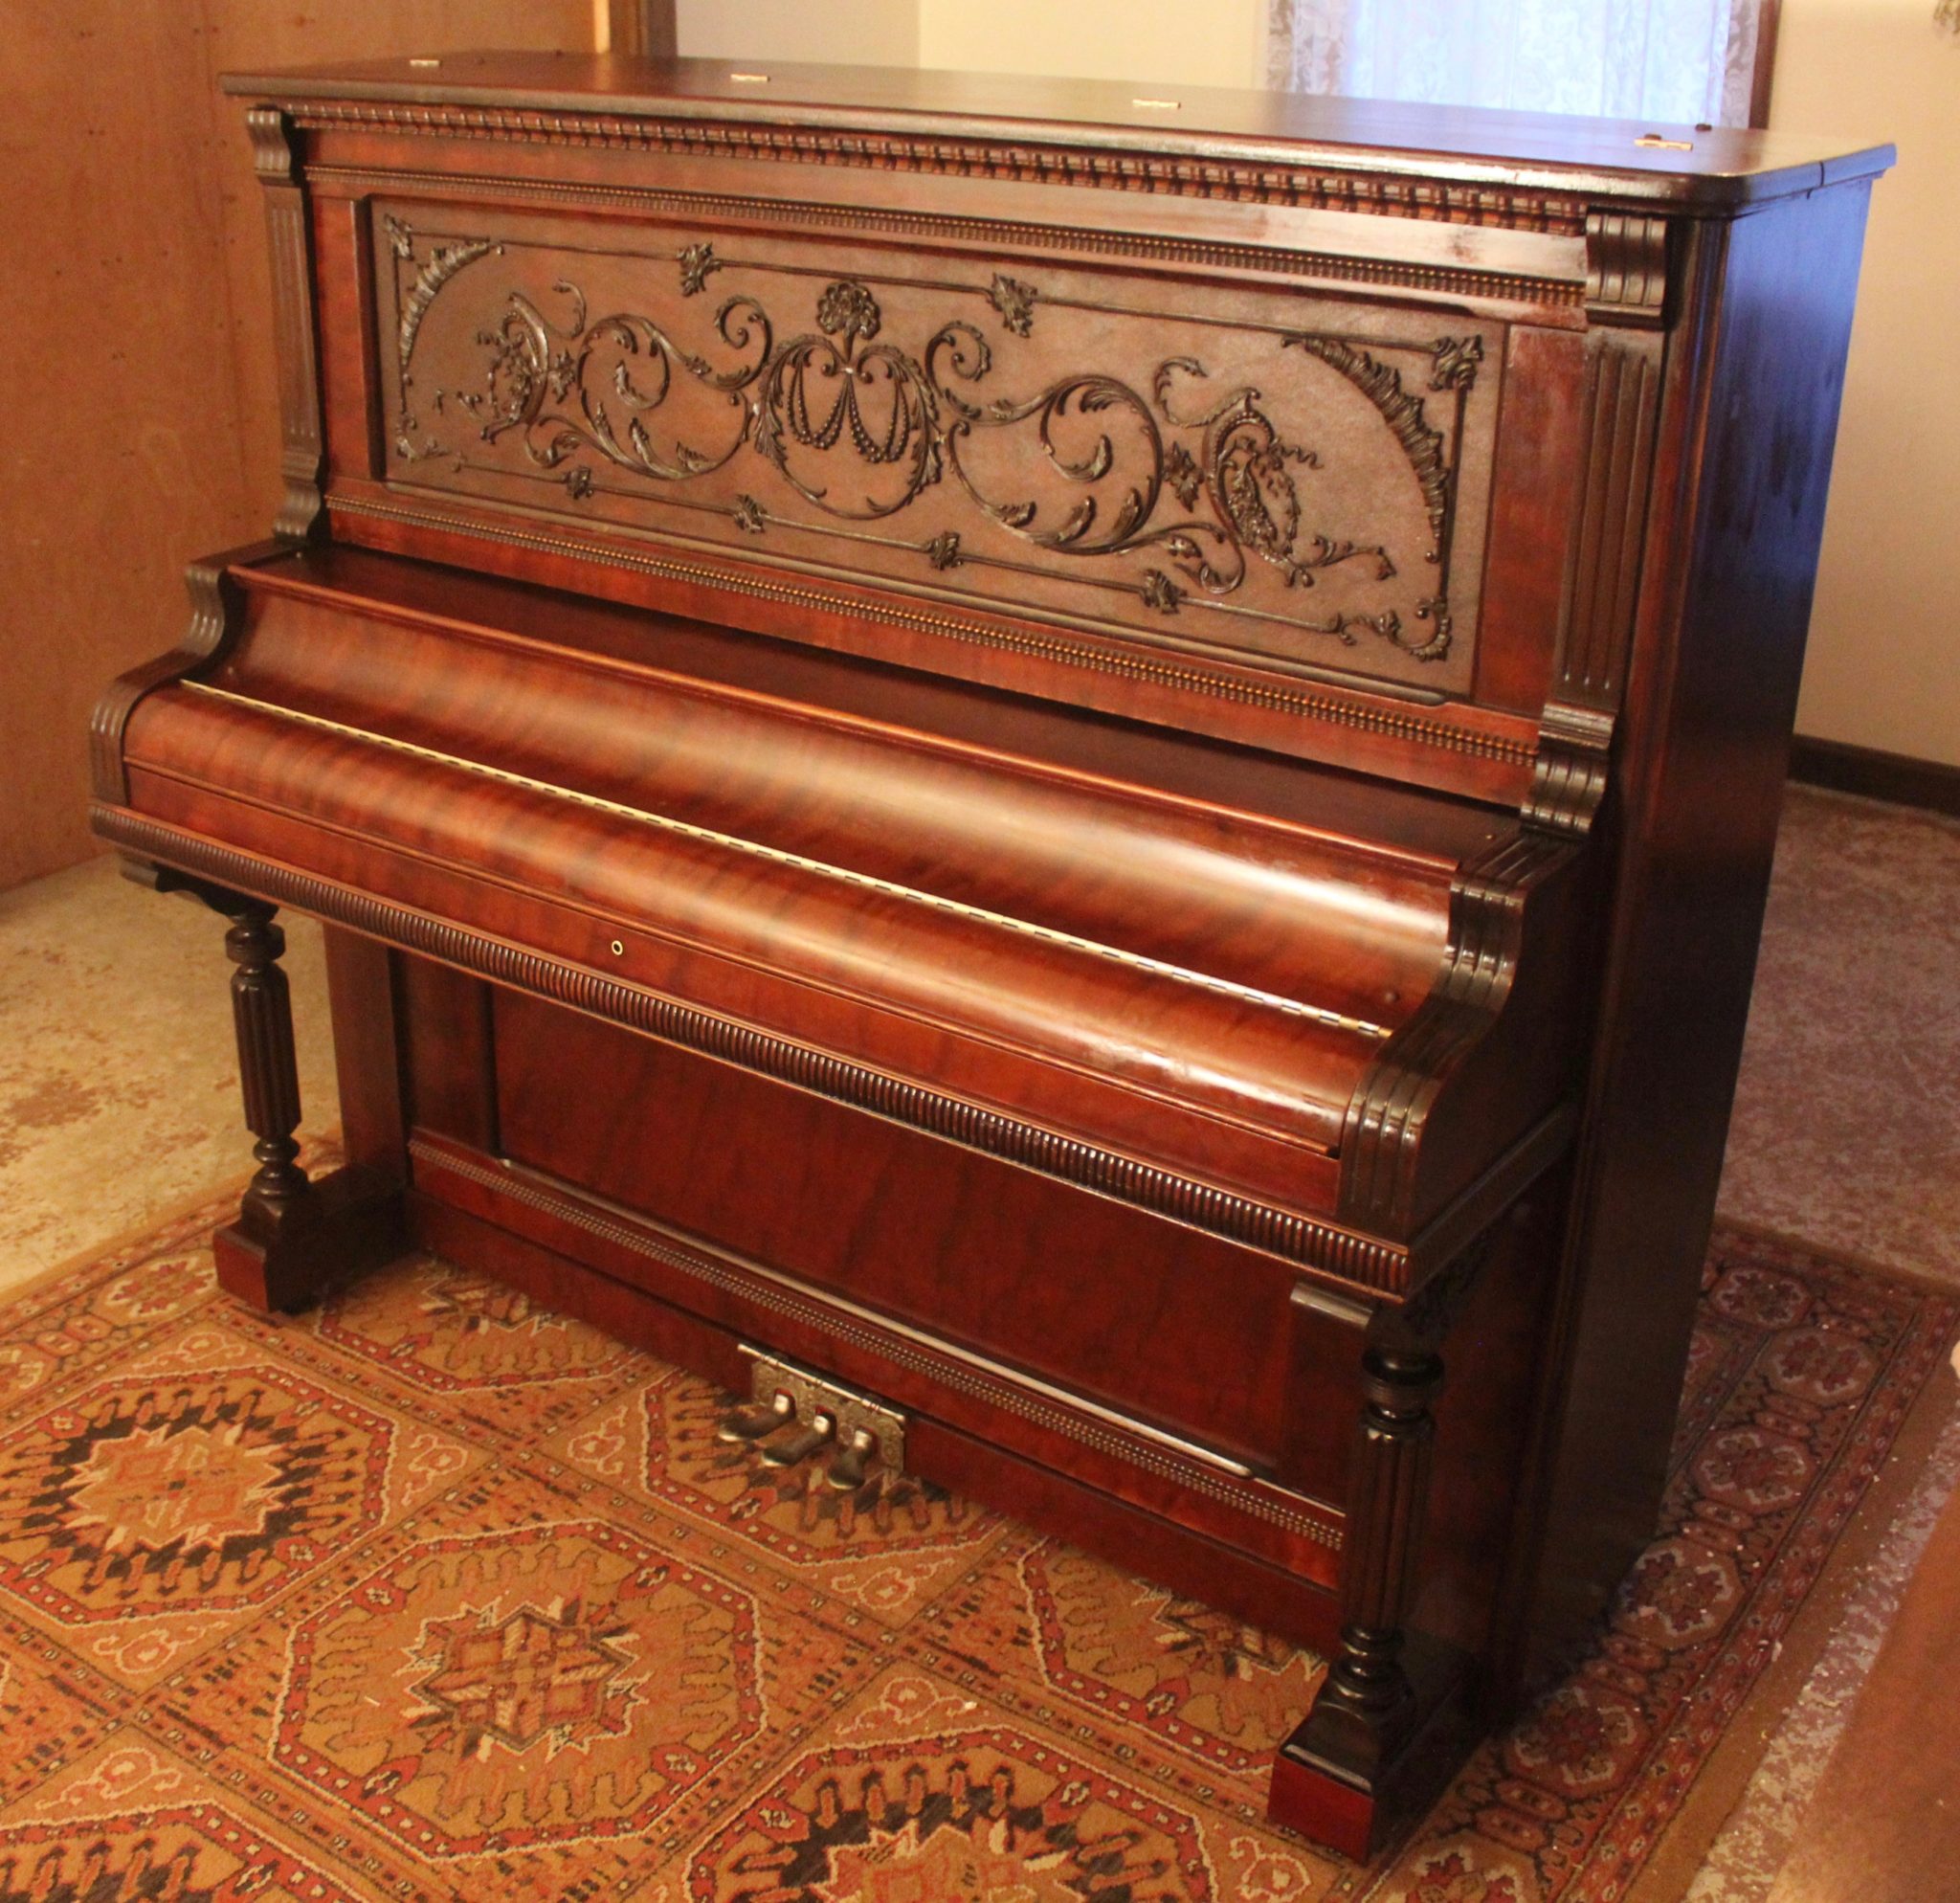 Richmond Upright - Serial #24200 - 1900 - Young's Piano Shop